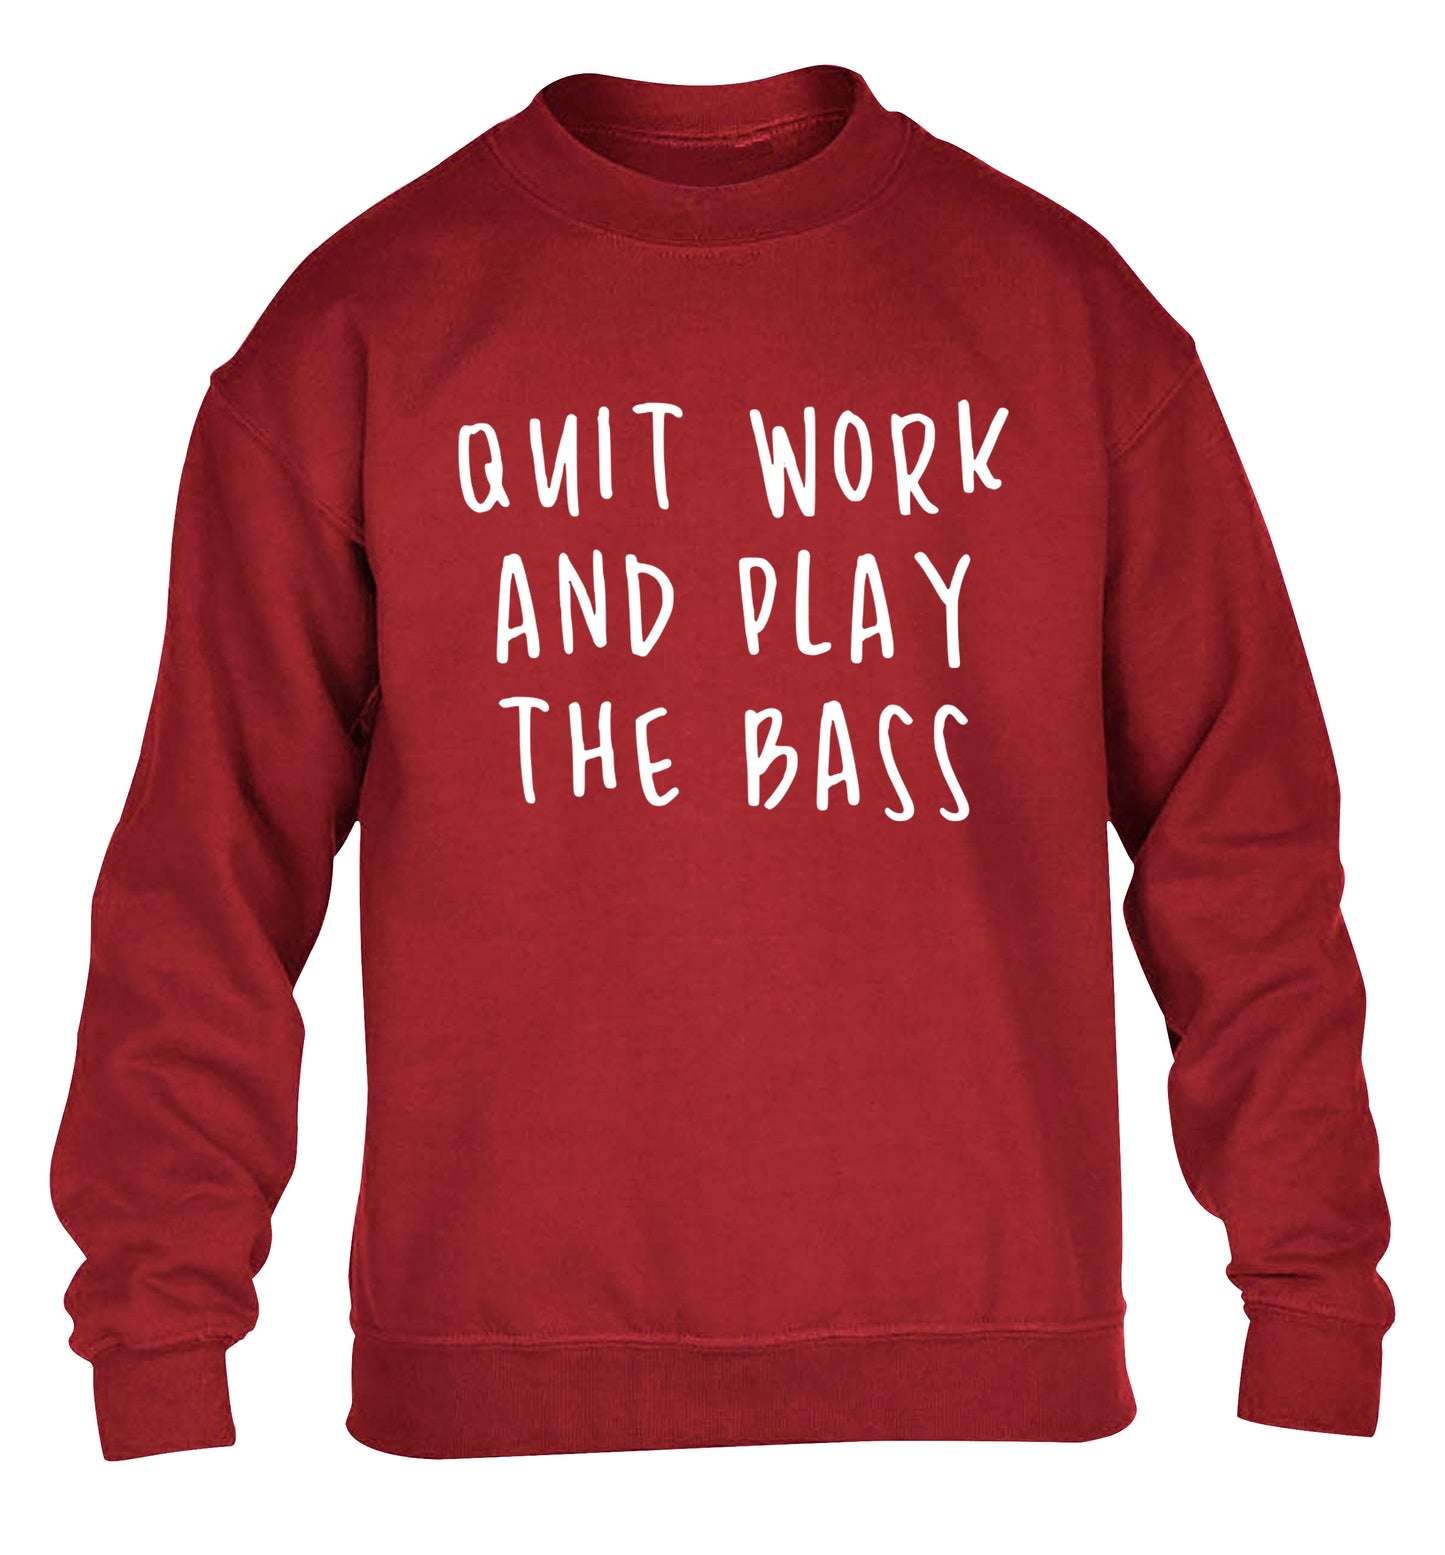 Quit work and play the bass children's grey sweater 12-14 Years